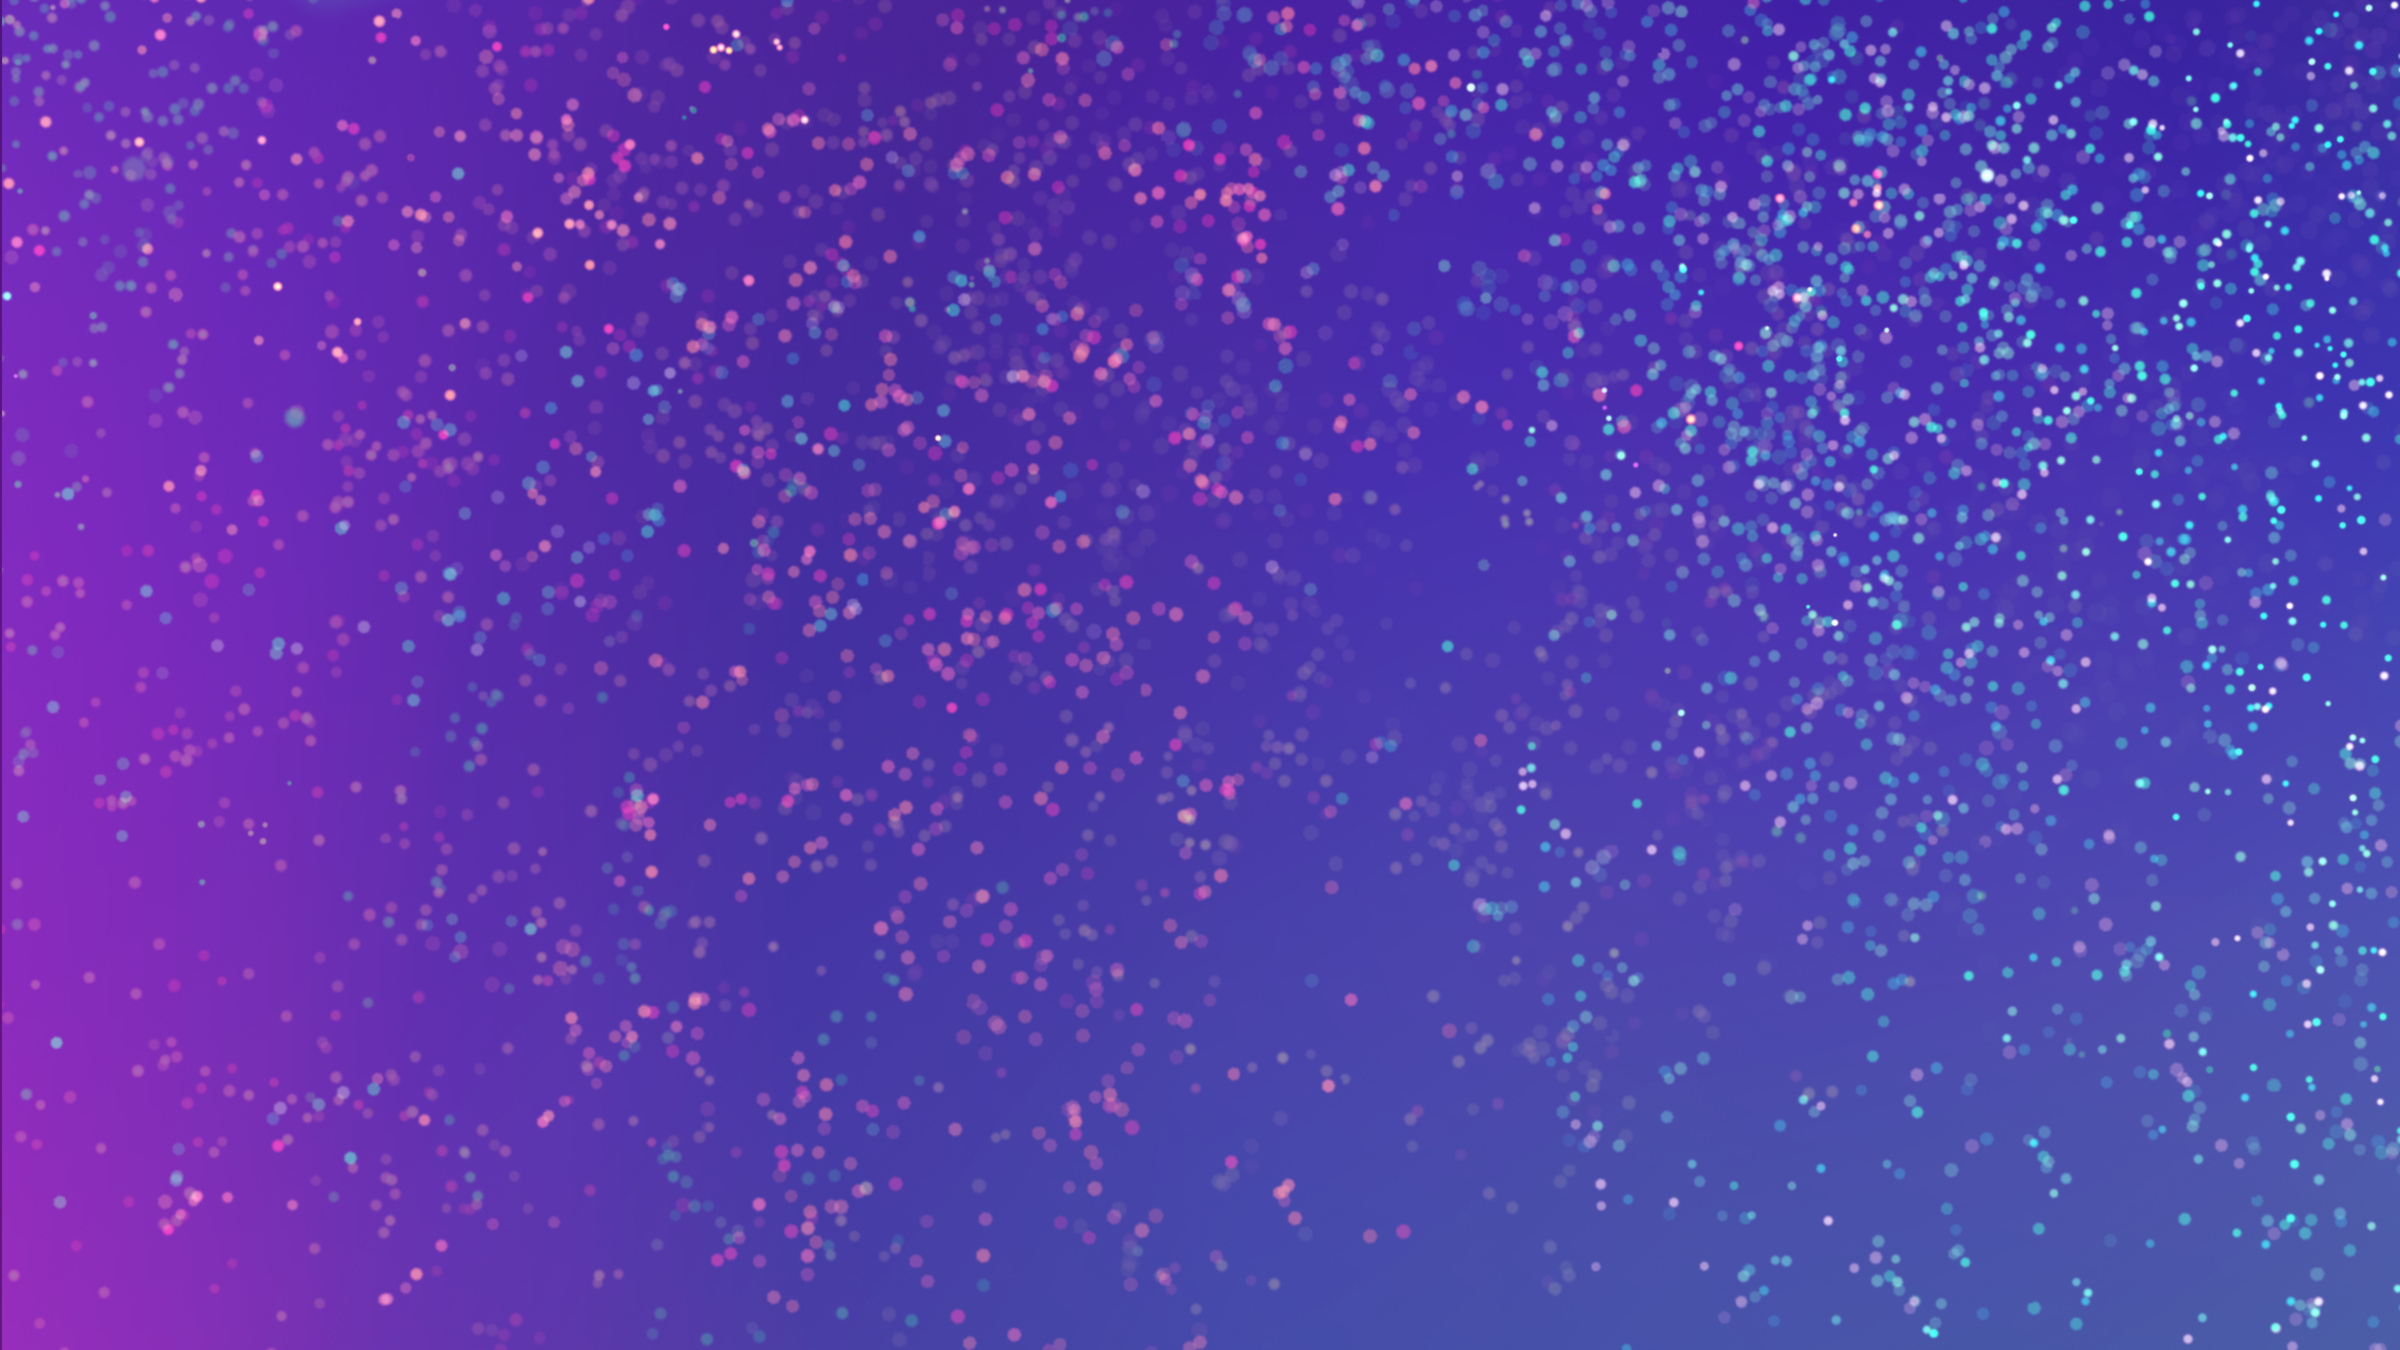 Abstract digital background with smooth shiny particles